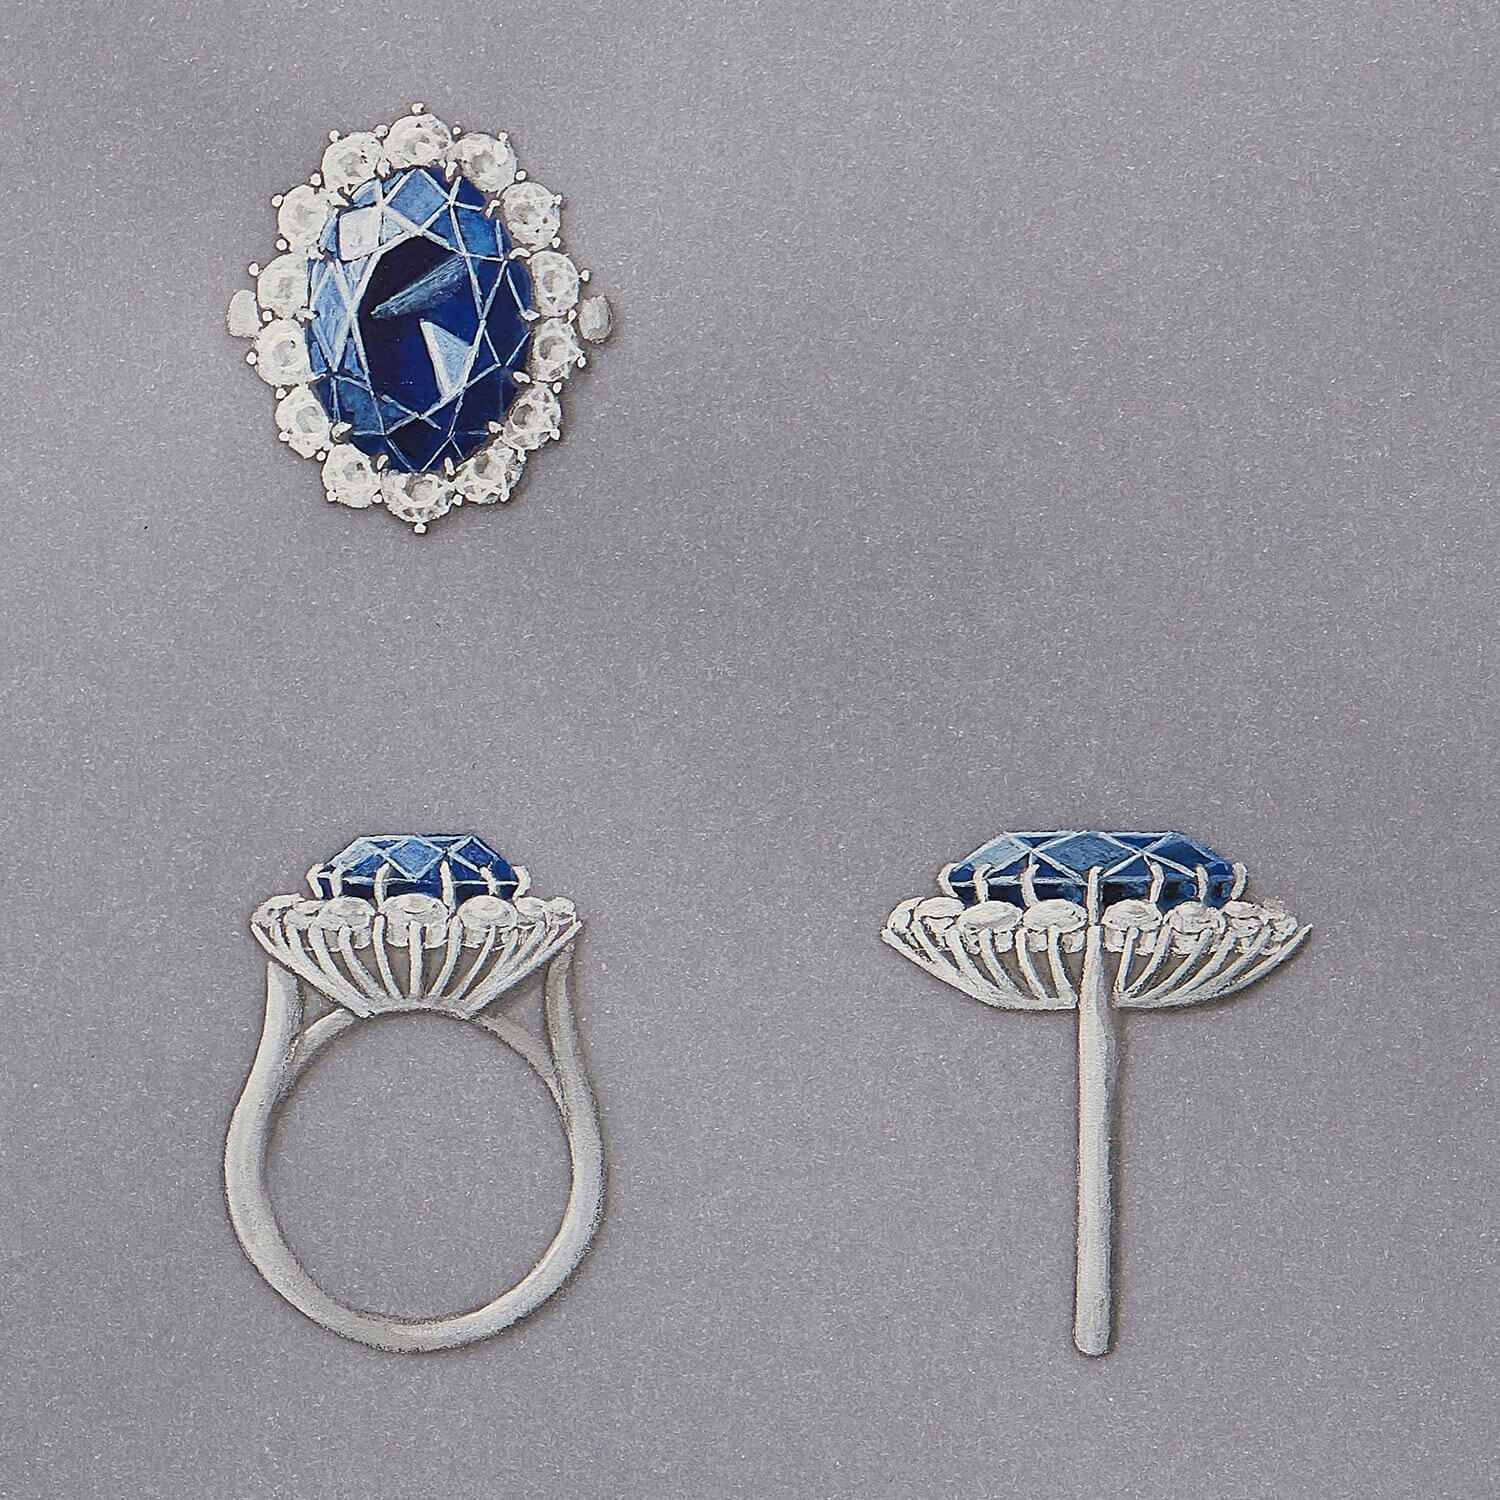 A painted goache drawing of princess diana's sapphire engagement ring by Garrard's